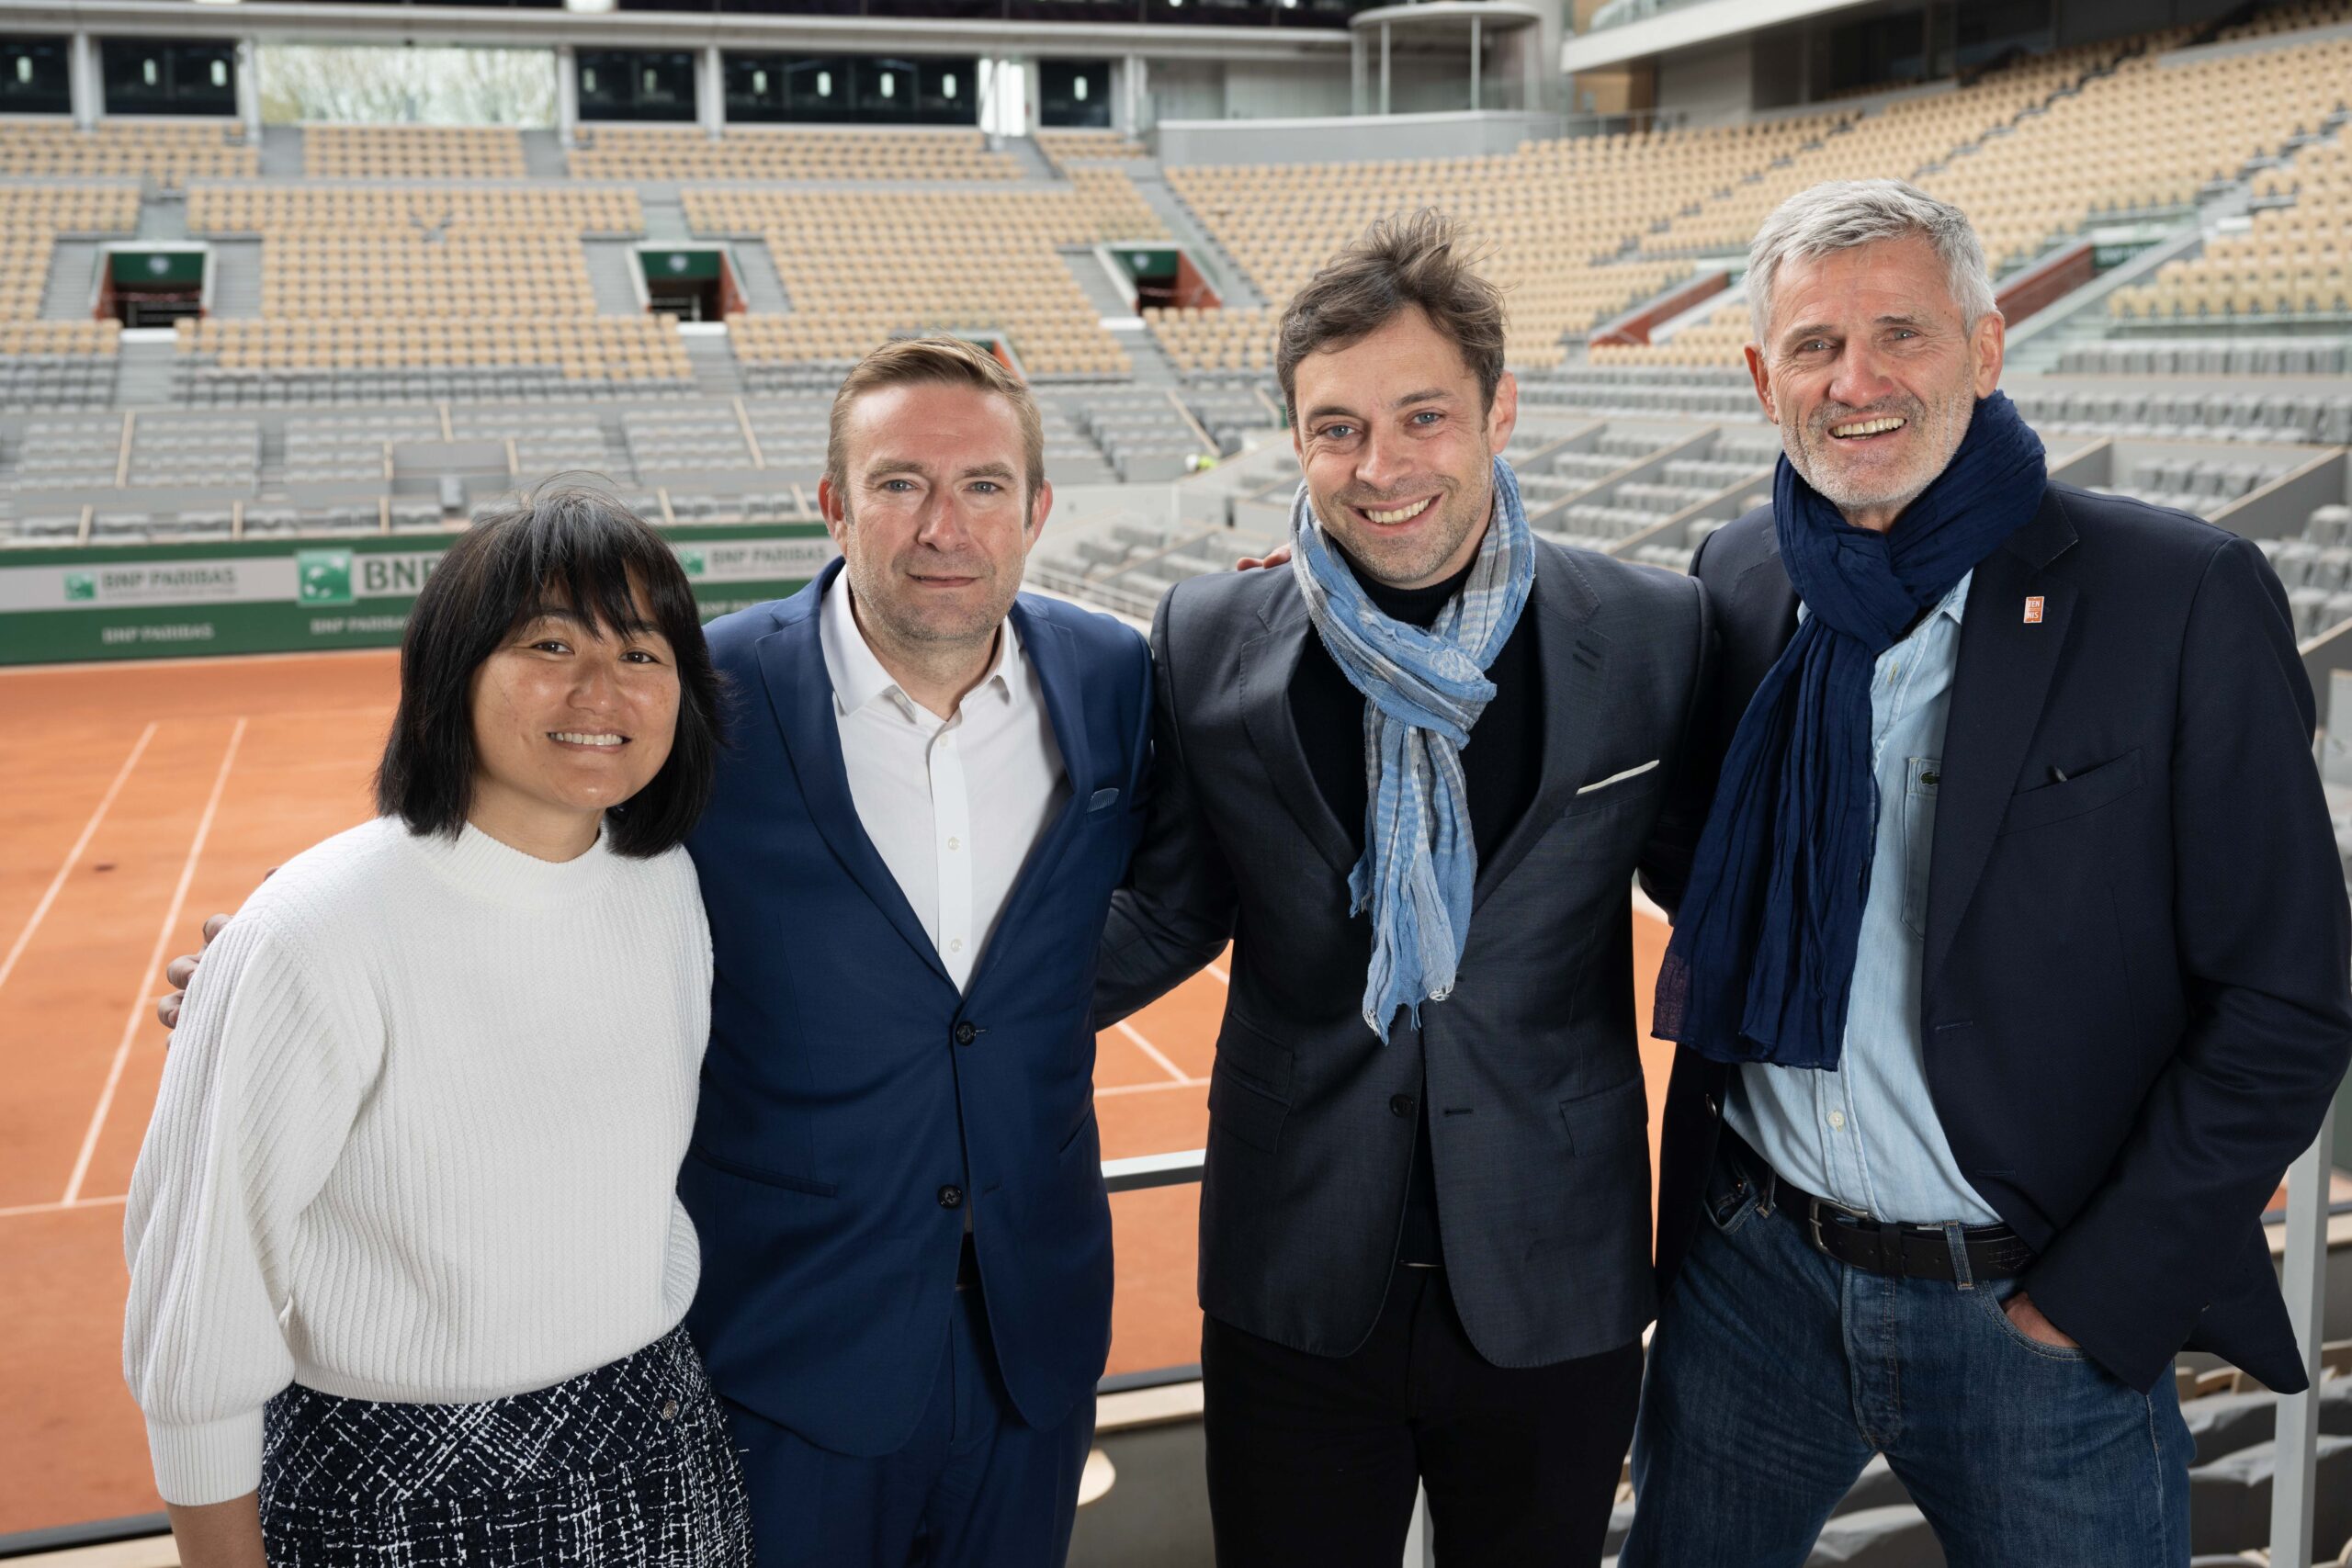 Haier is the official sponsor of the Roland Garros tennis tournaments